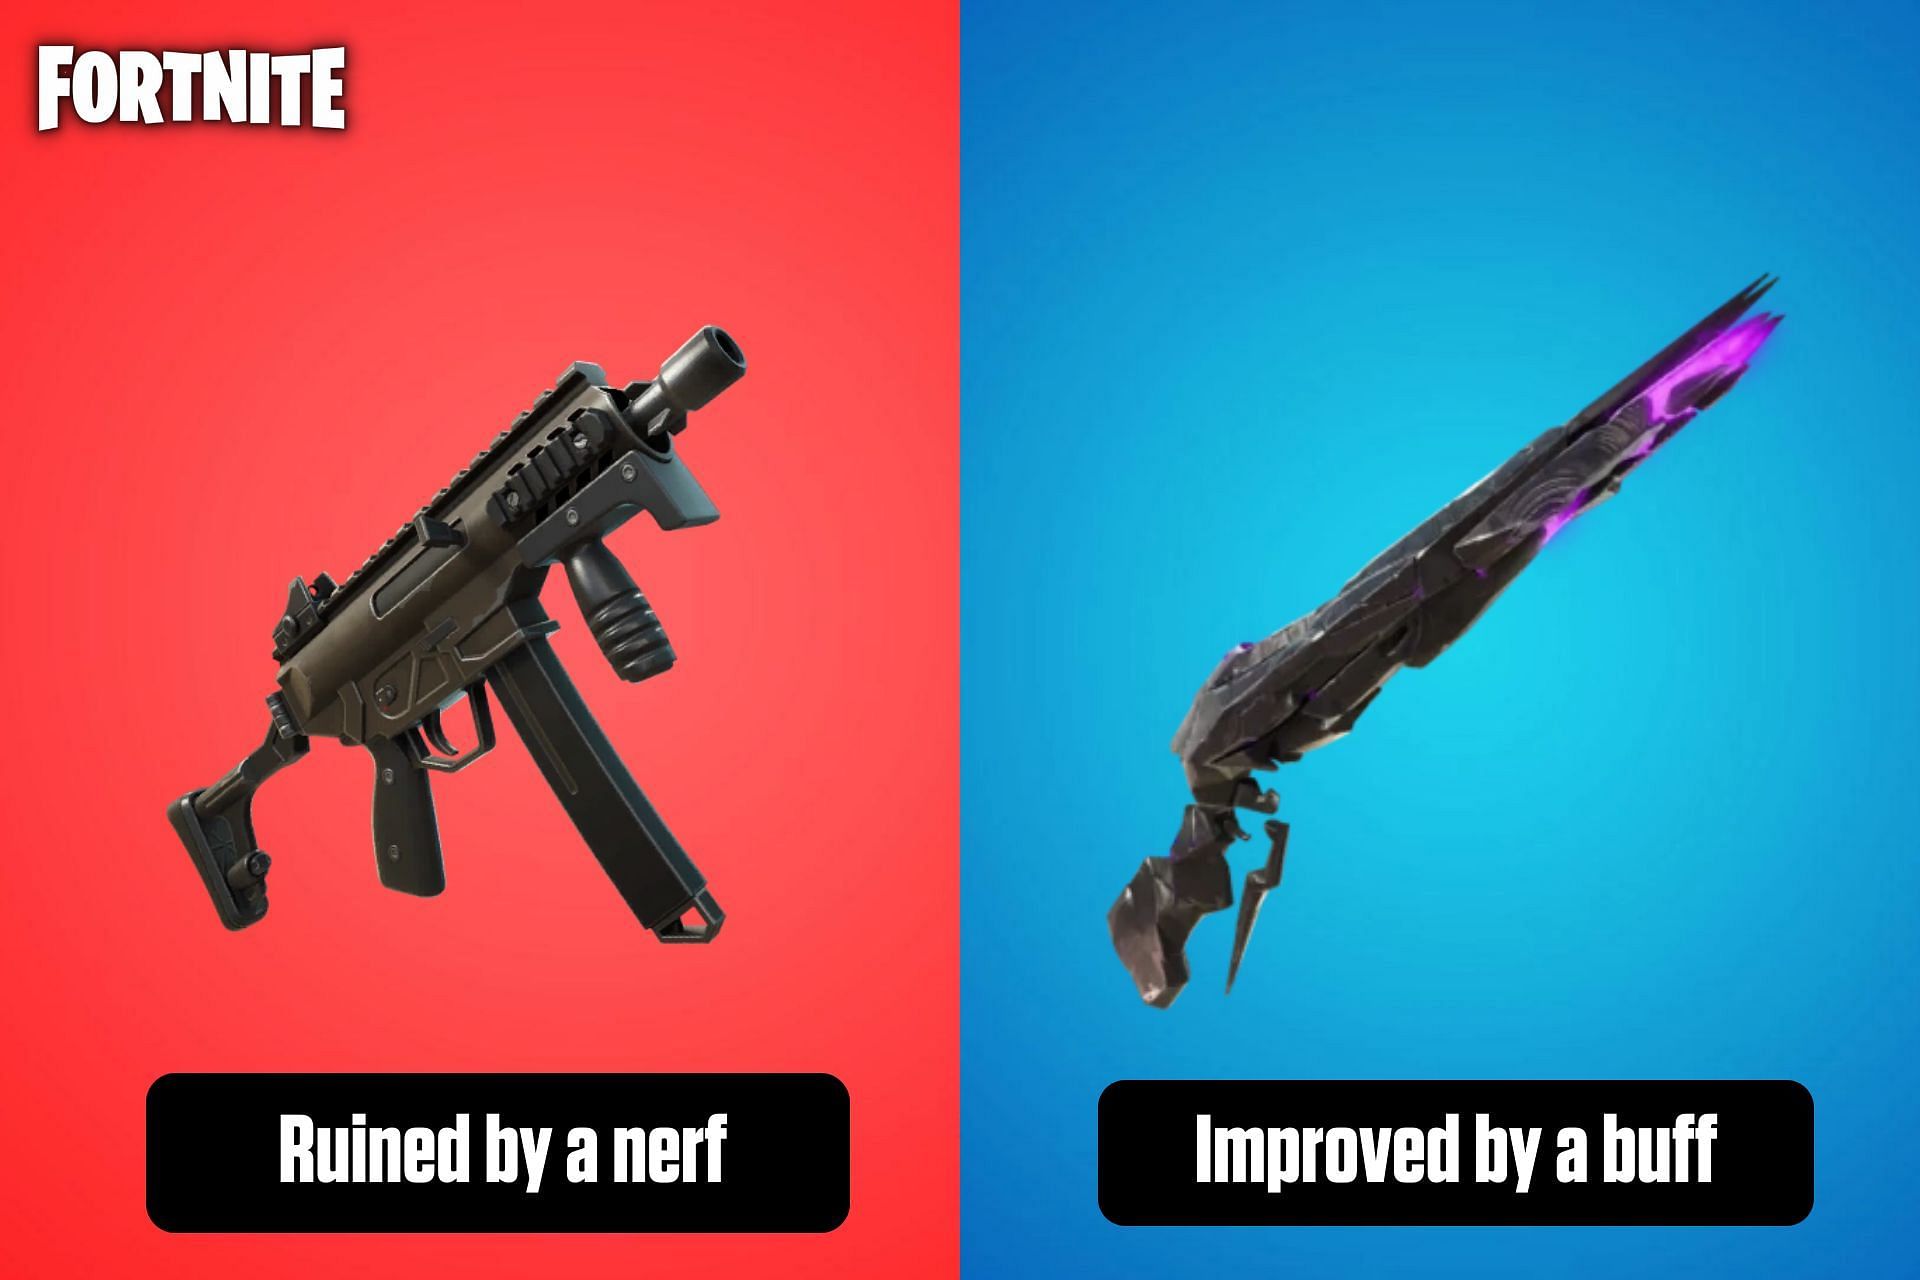 Not all weapons are created equal in Fortnite (Image via Sportskeeda)